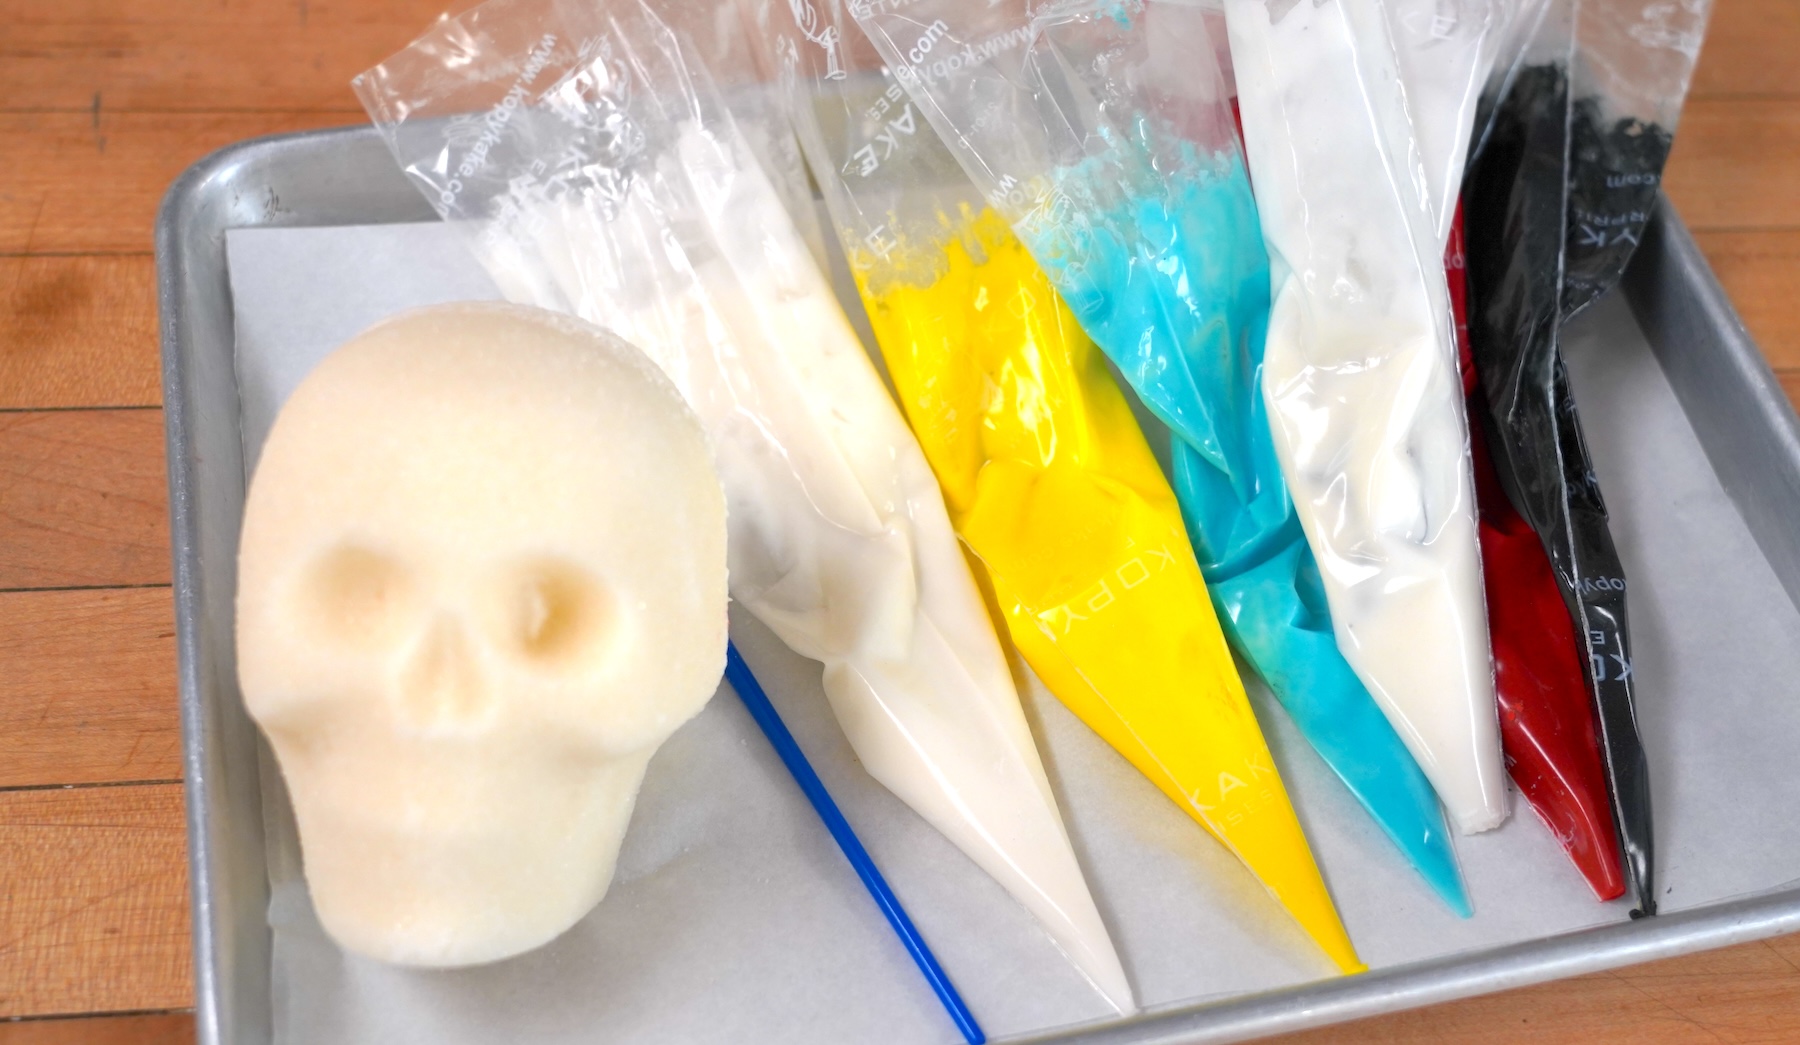 A white sugar skull sits nexts to piping bags full of colored royal icing